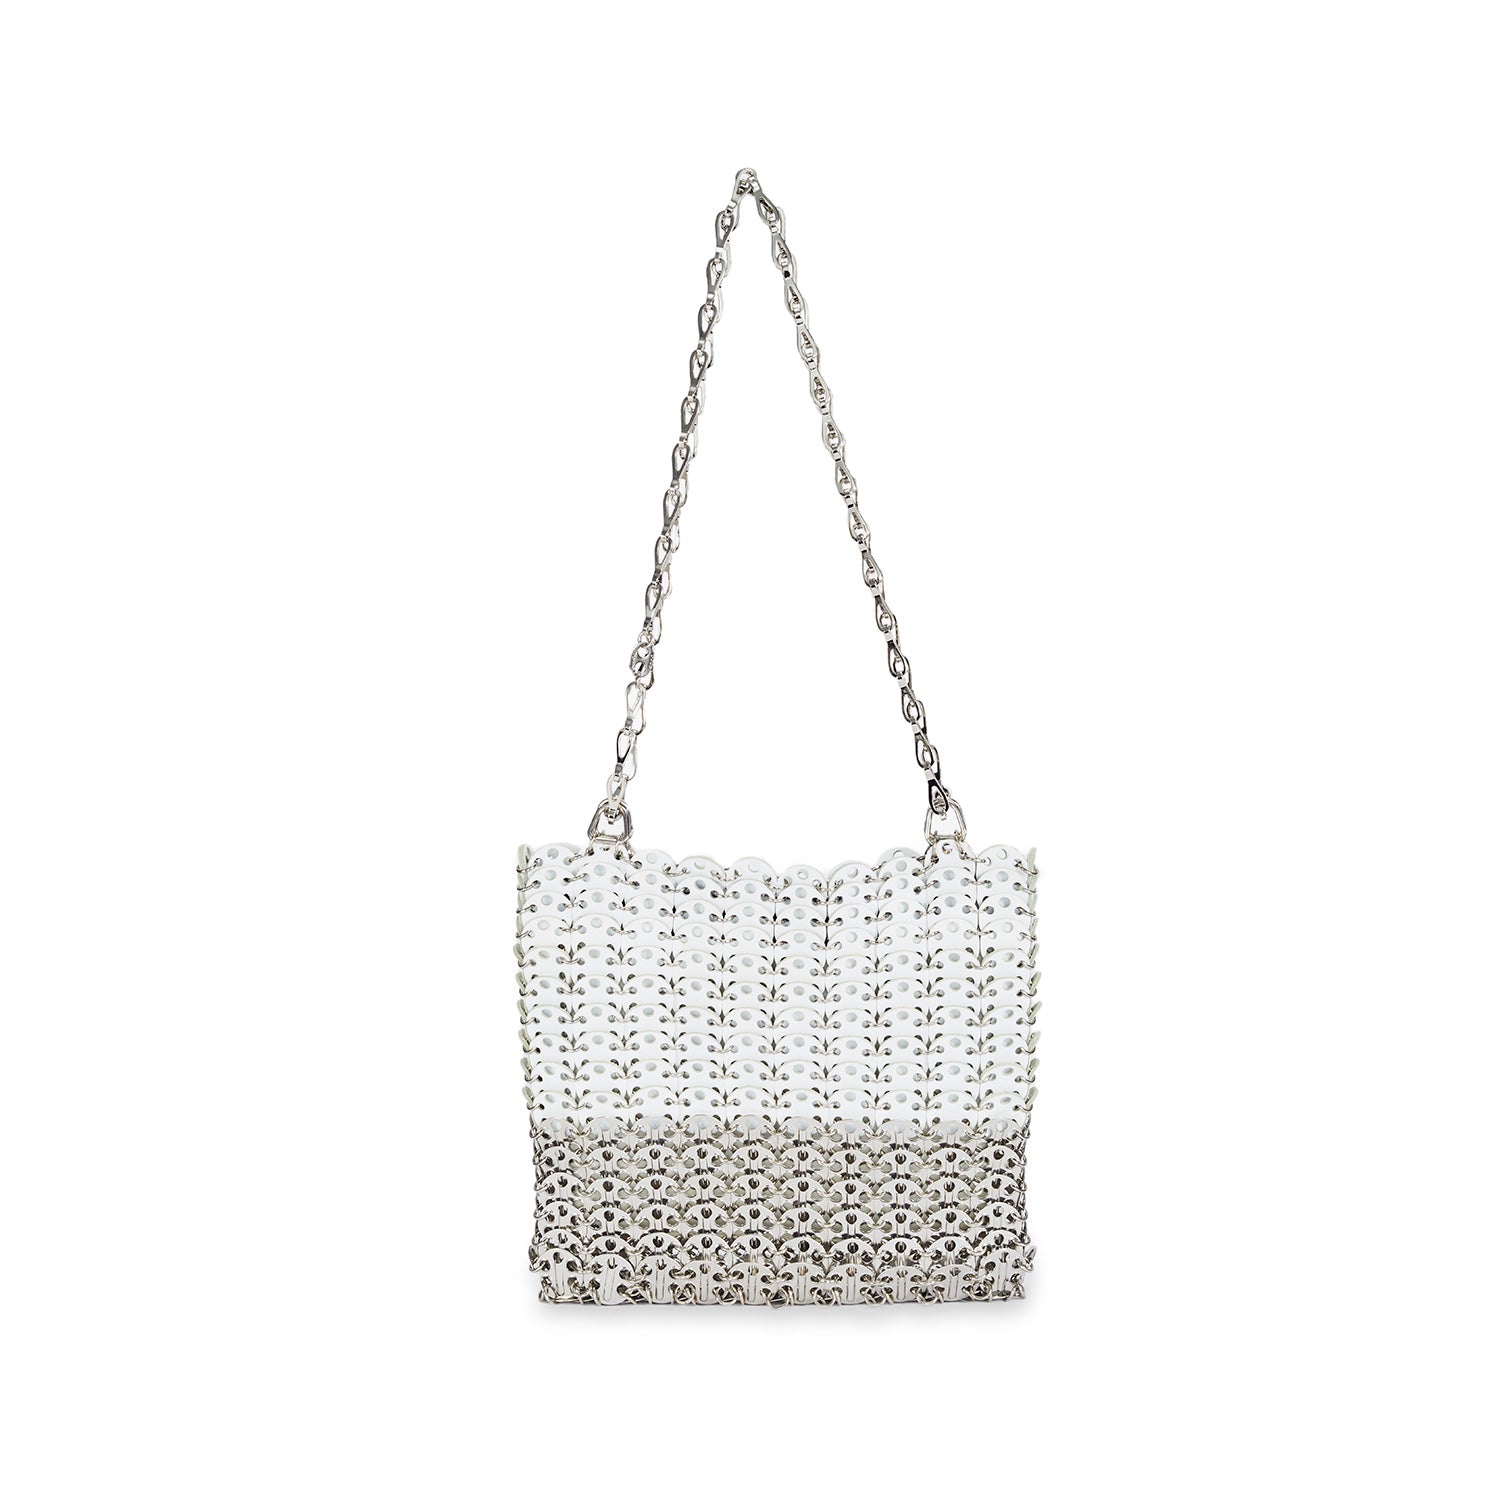 Paco Rabanne [パコ ラバンヌ] / ''chainmail '' leather metal bag [チェーンメール レザーメタルバッグ]